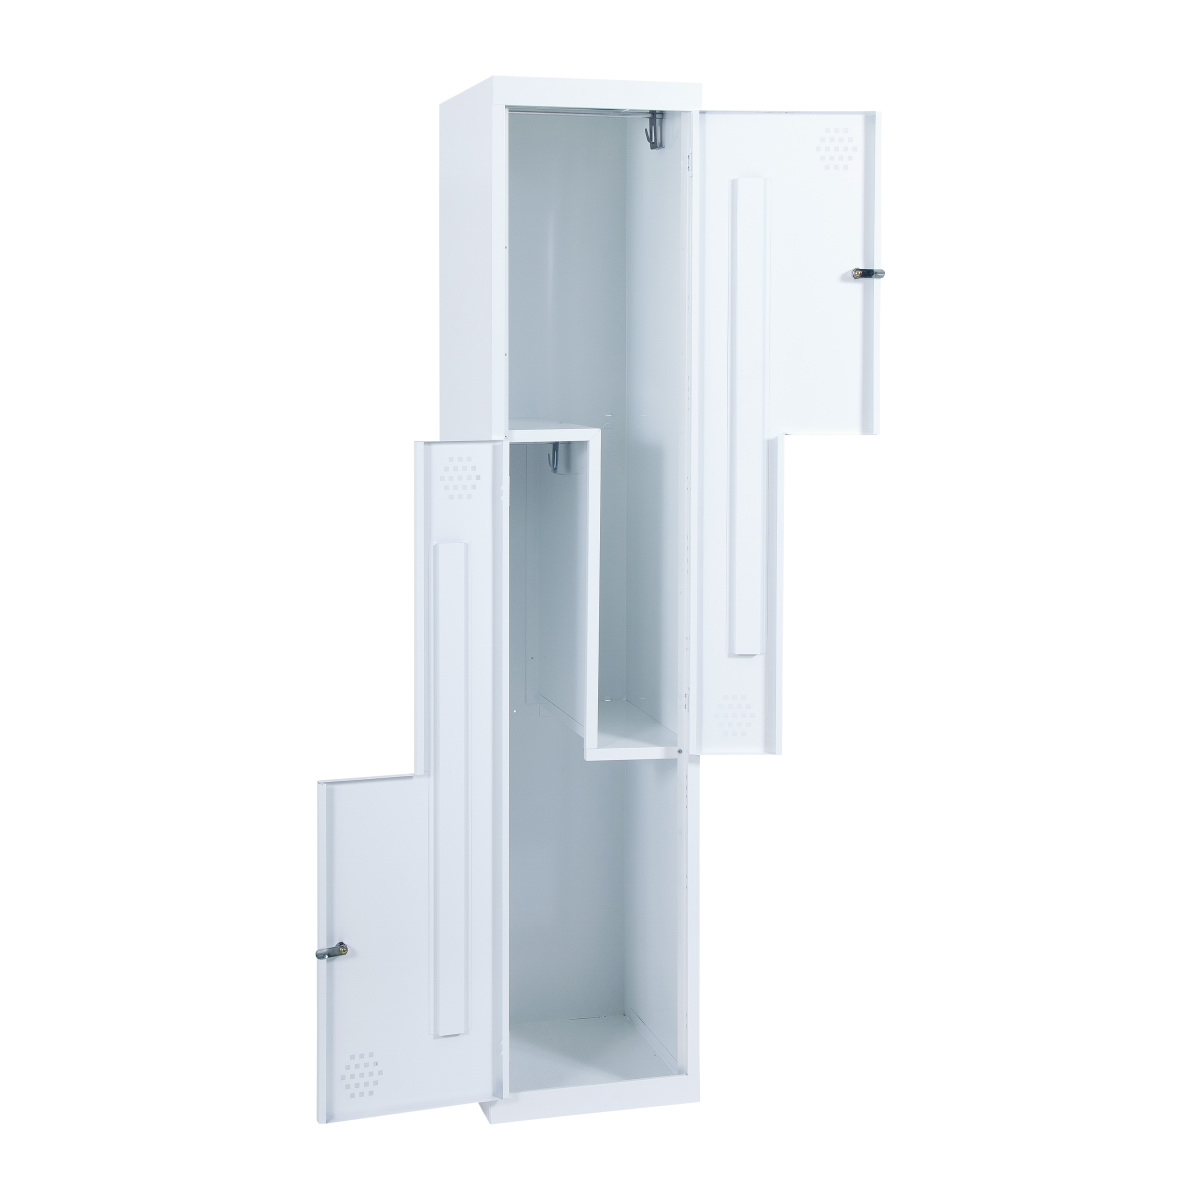 Statewide Step Lockers - 300/380 wide